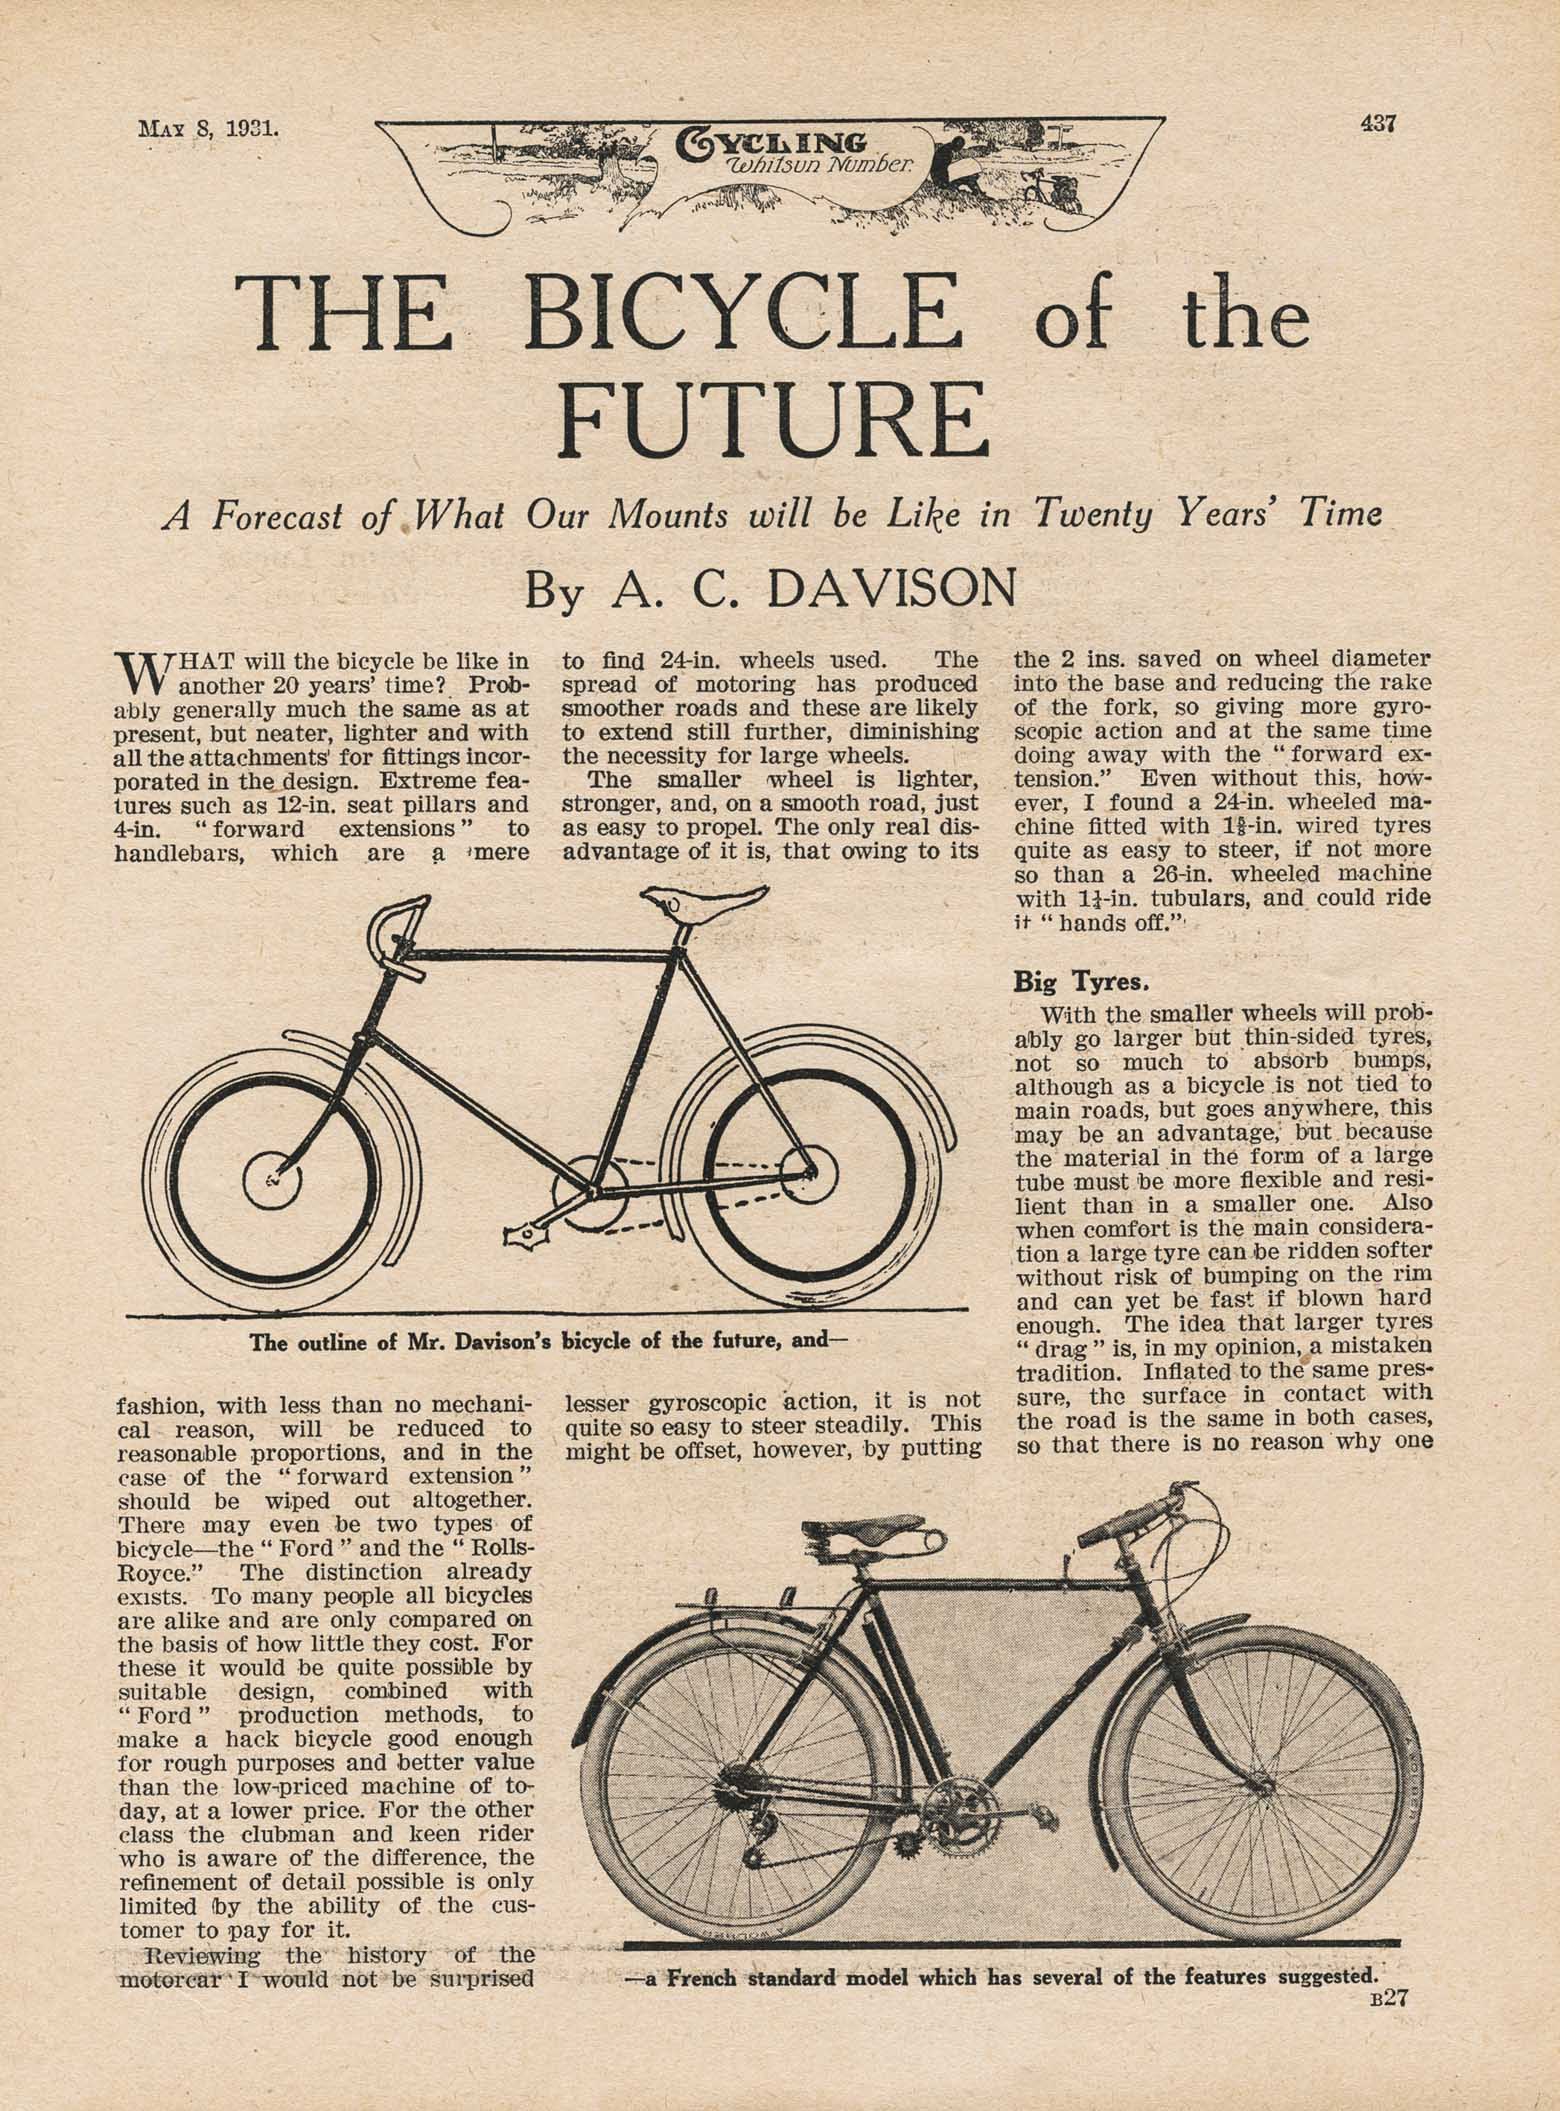 Cycling 1931-05-08 - The Bicycle of the Future 01 main image